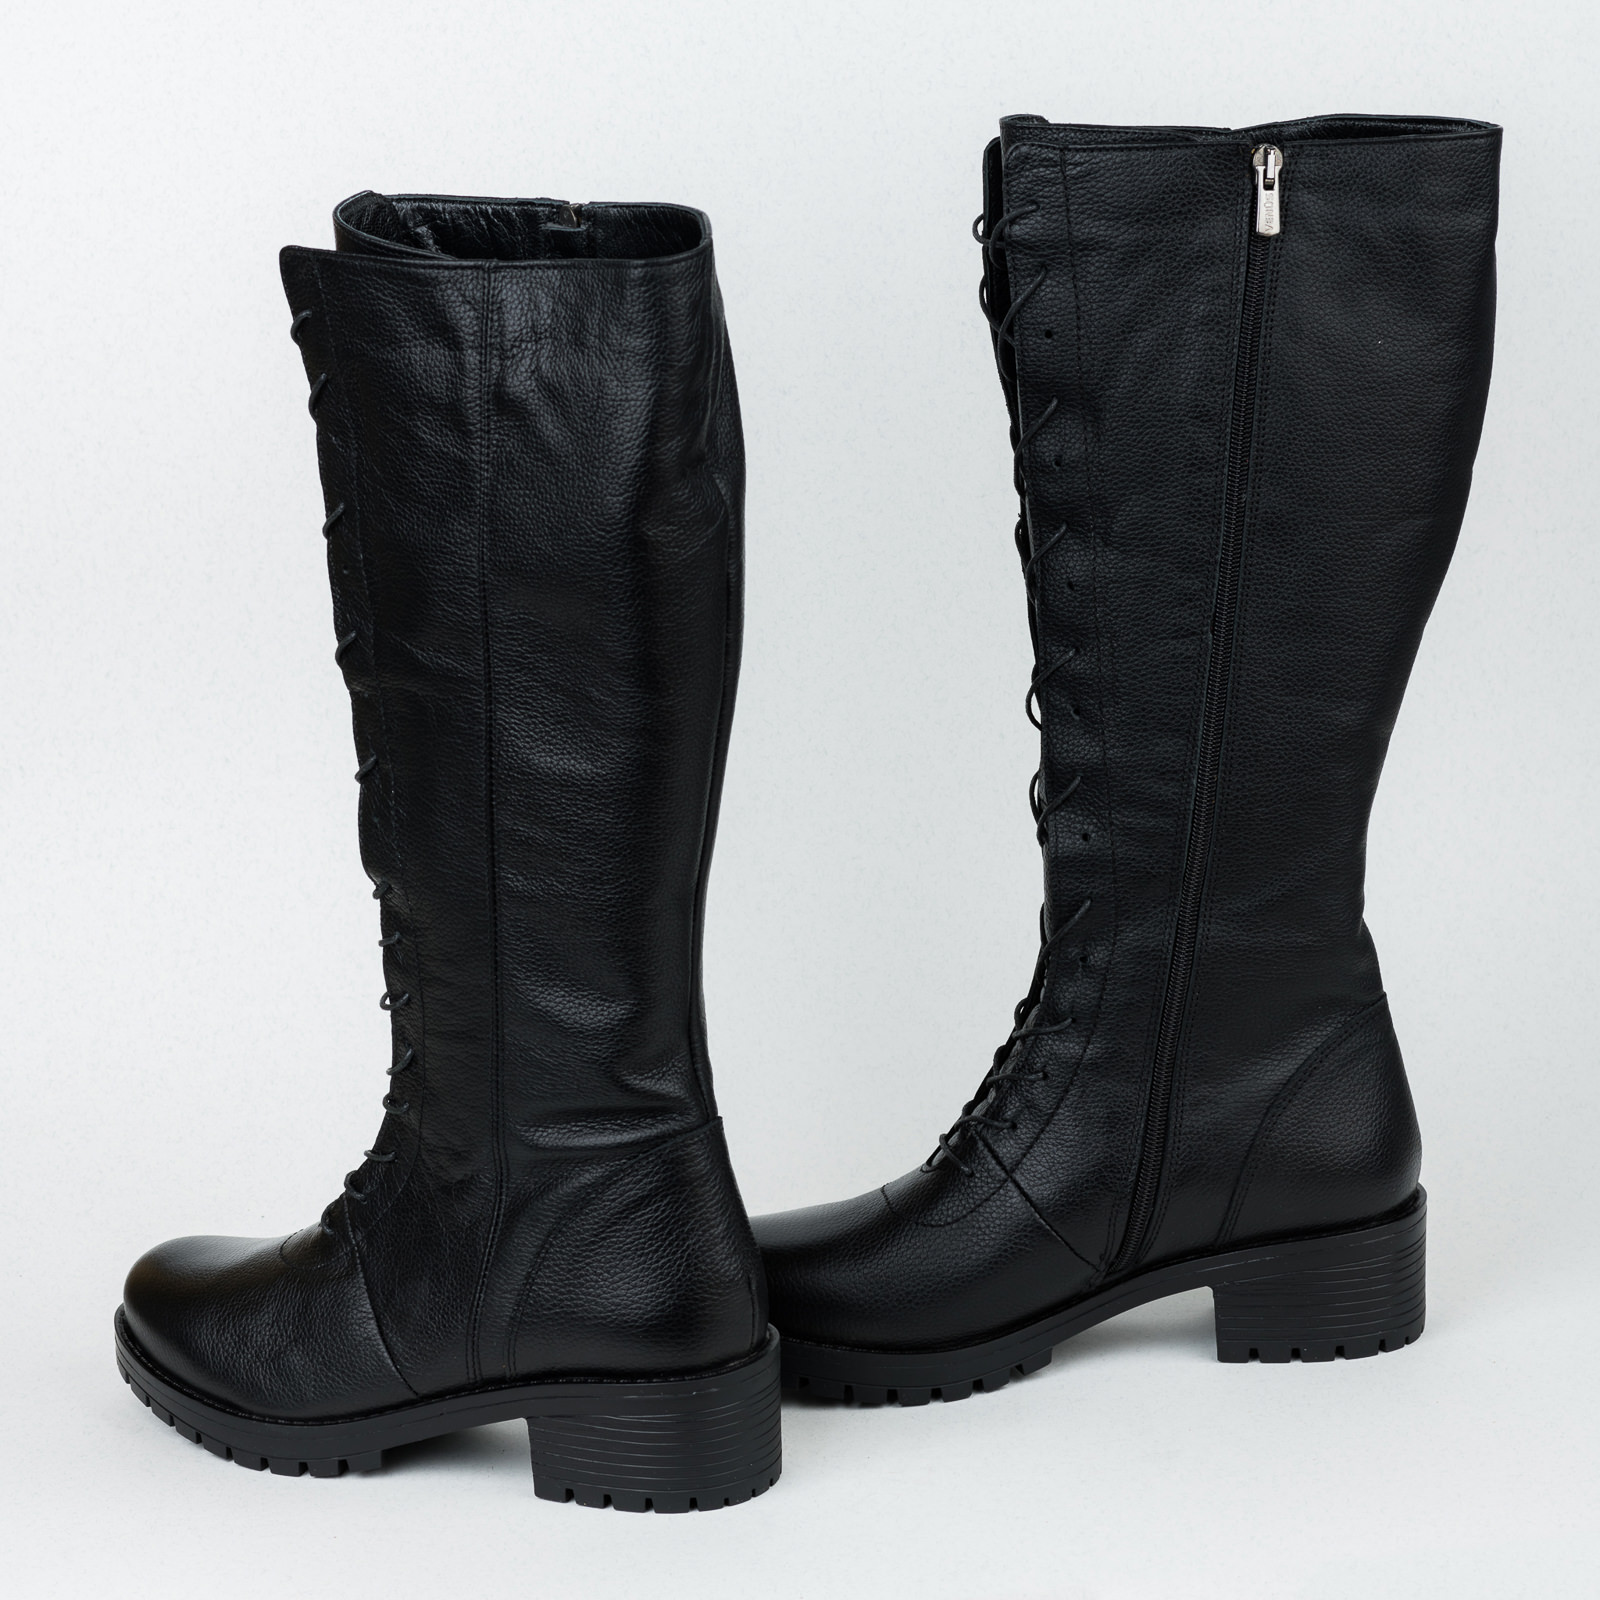 Leather boots B447 - BLACK